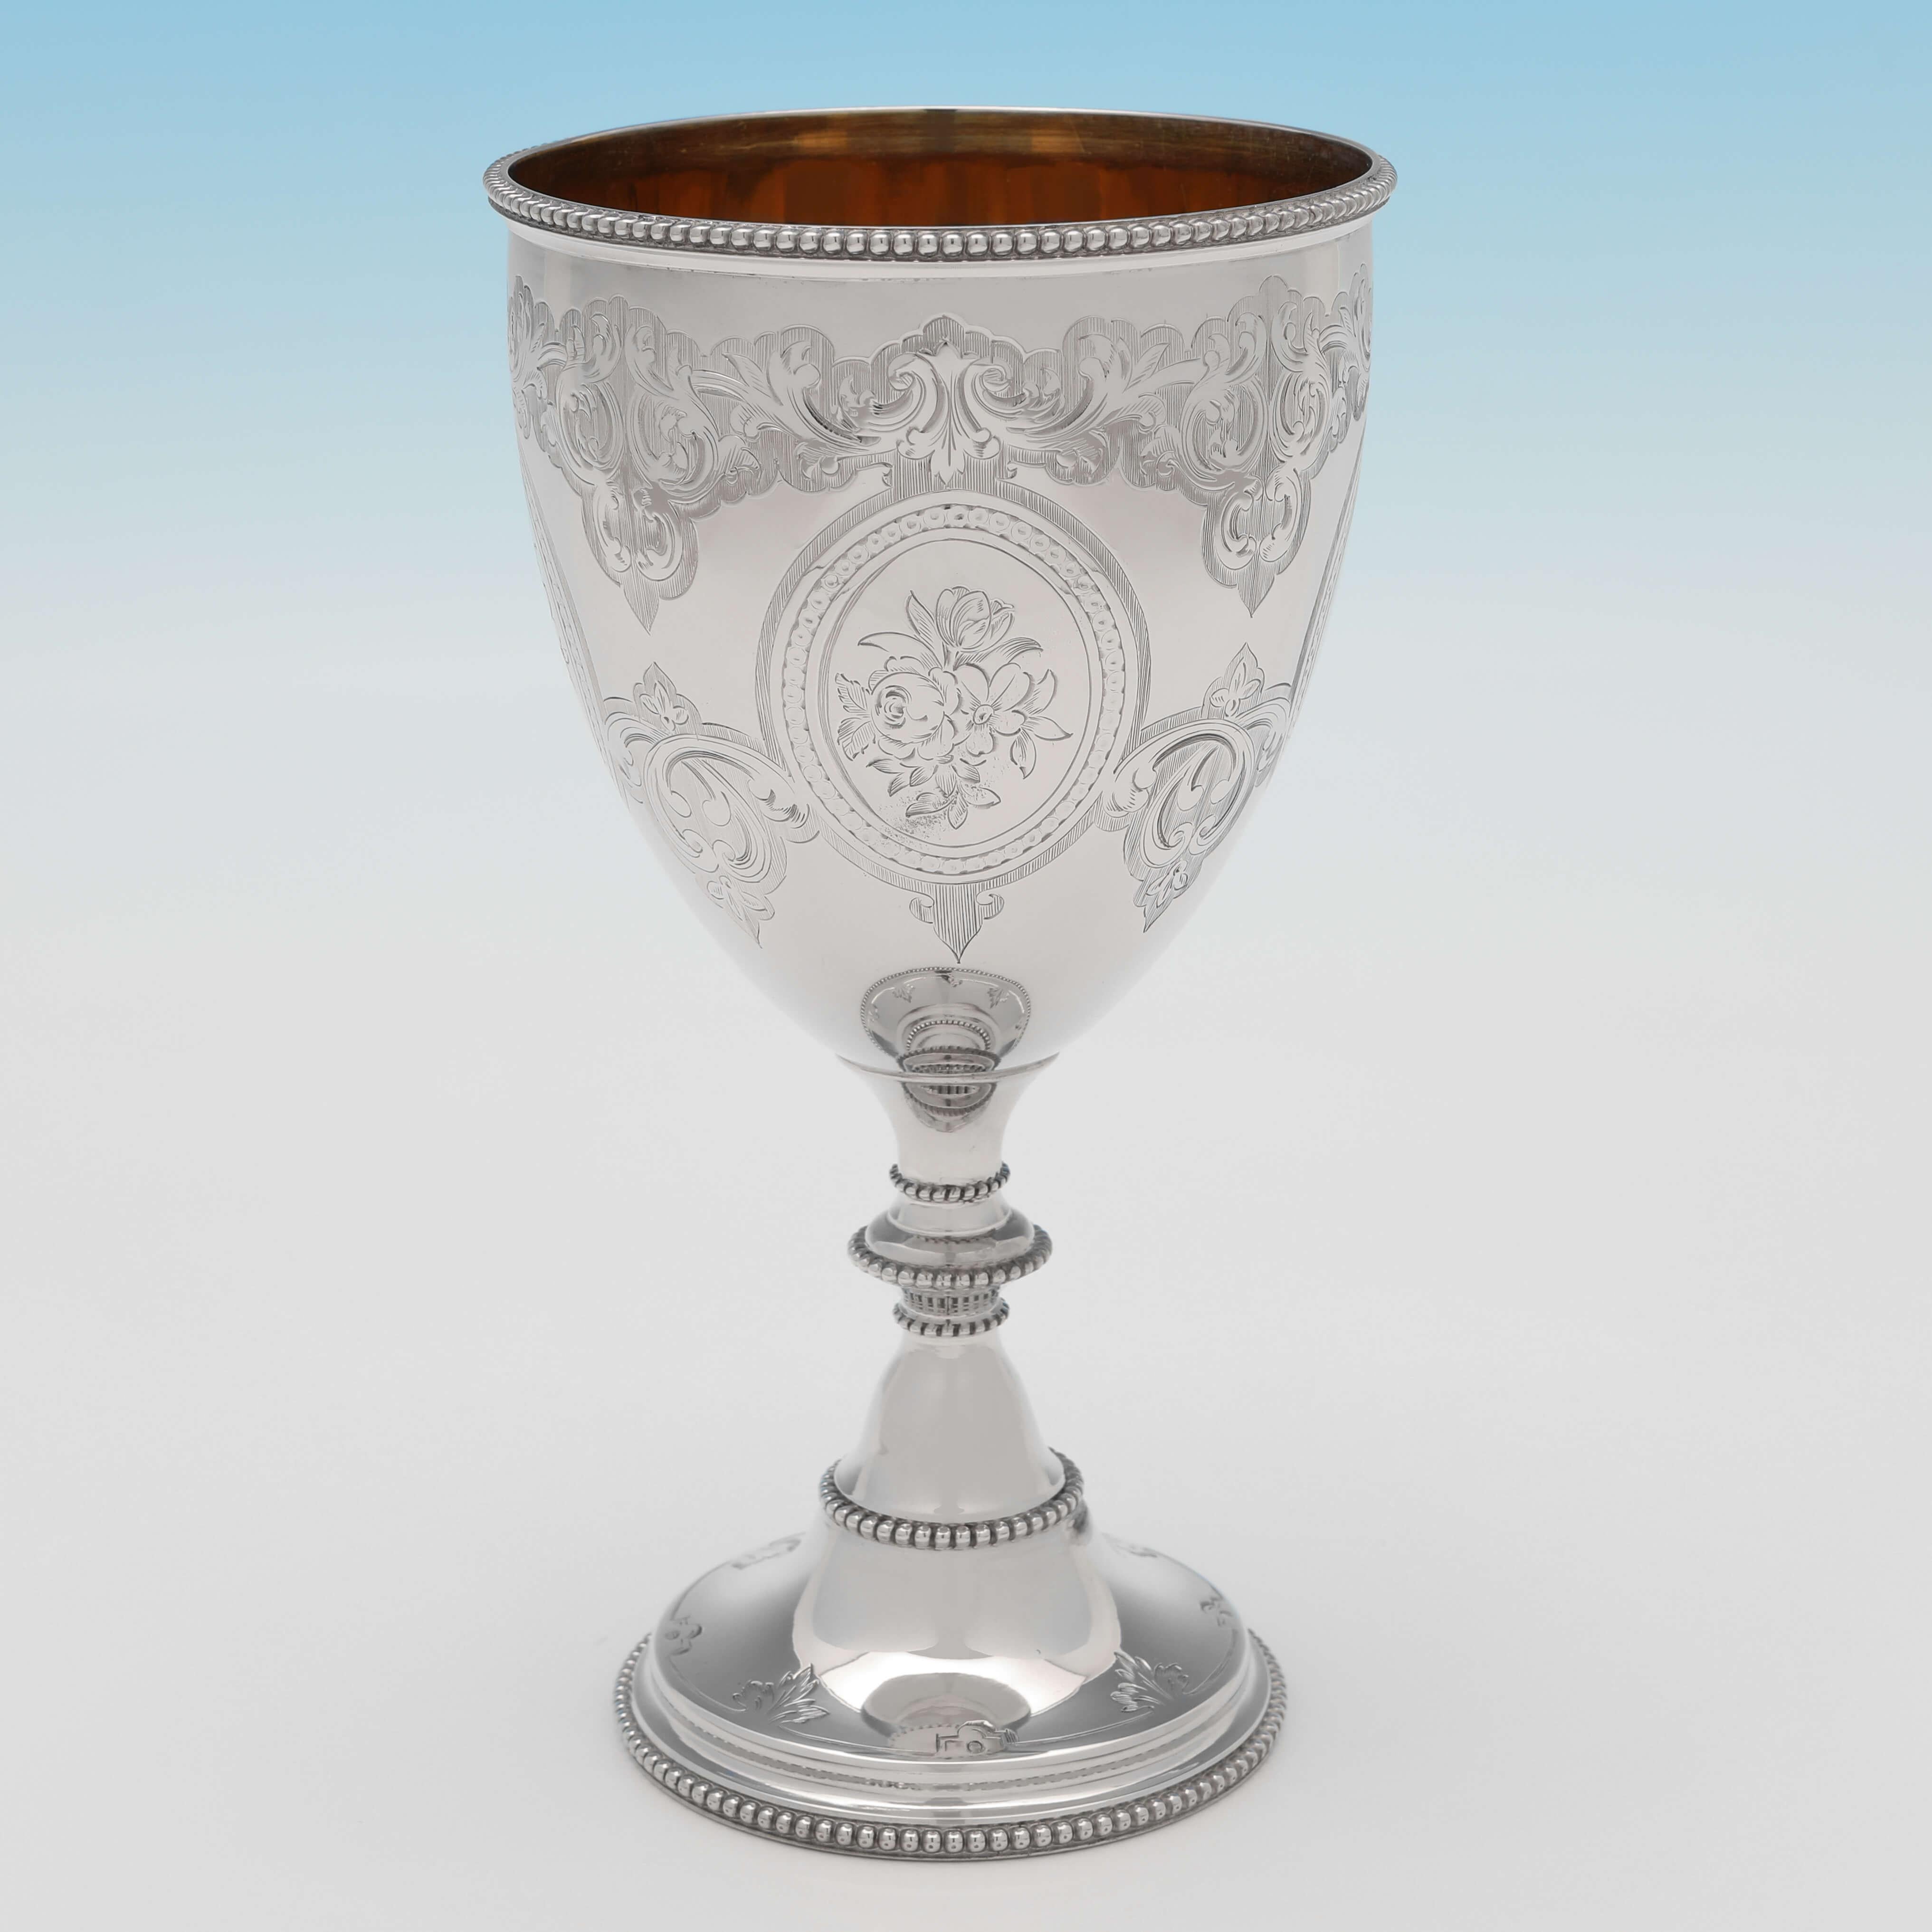 Hallmarked in London in 1861 by Henry Wilkinson, this very attractive, Victorian, Antique Sterling Silver Goblet, features engraved decoration to the body, bead borders, and a gilt interior. The goblet measures 6.5